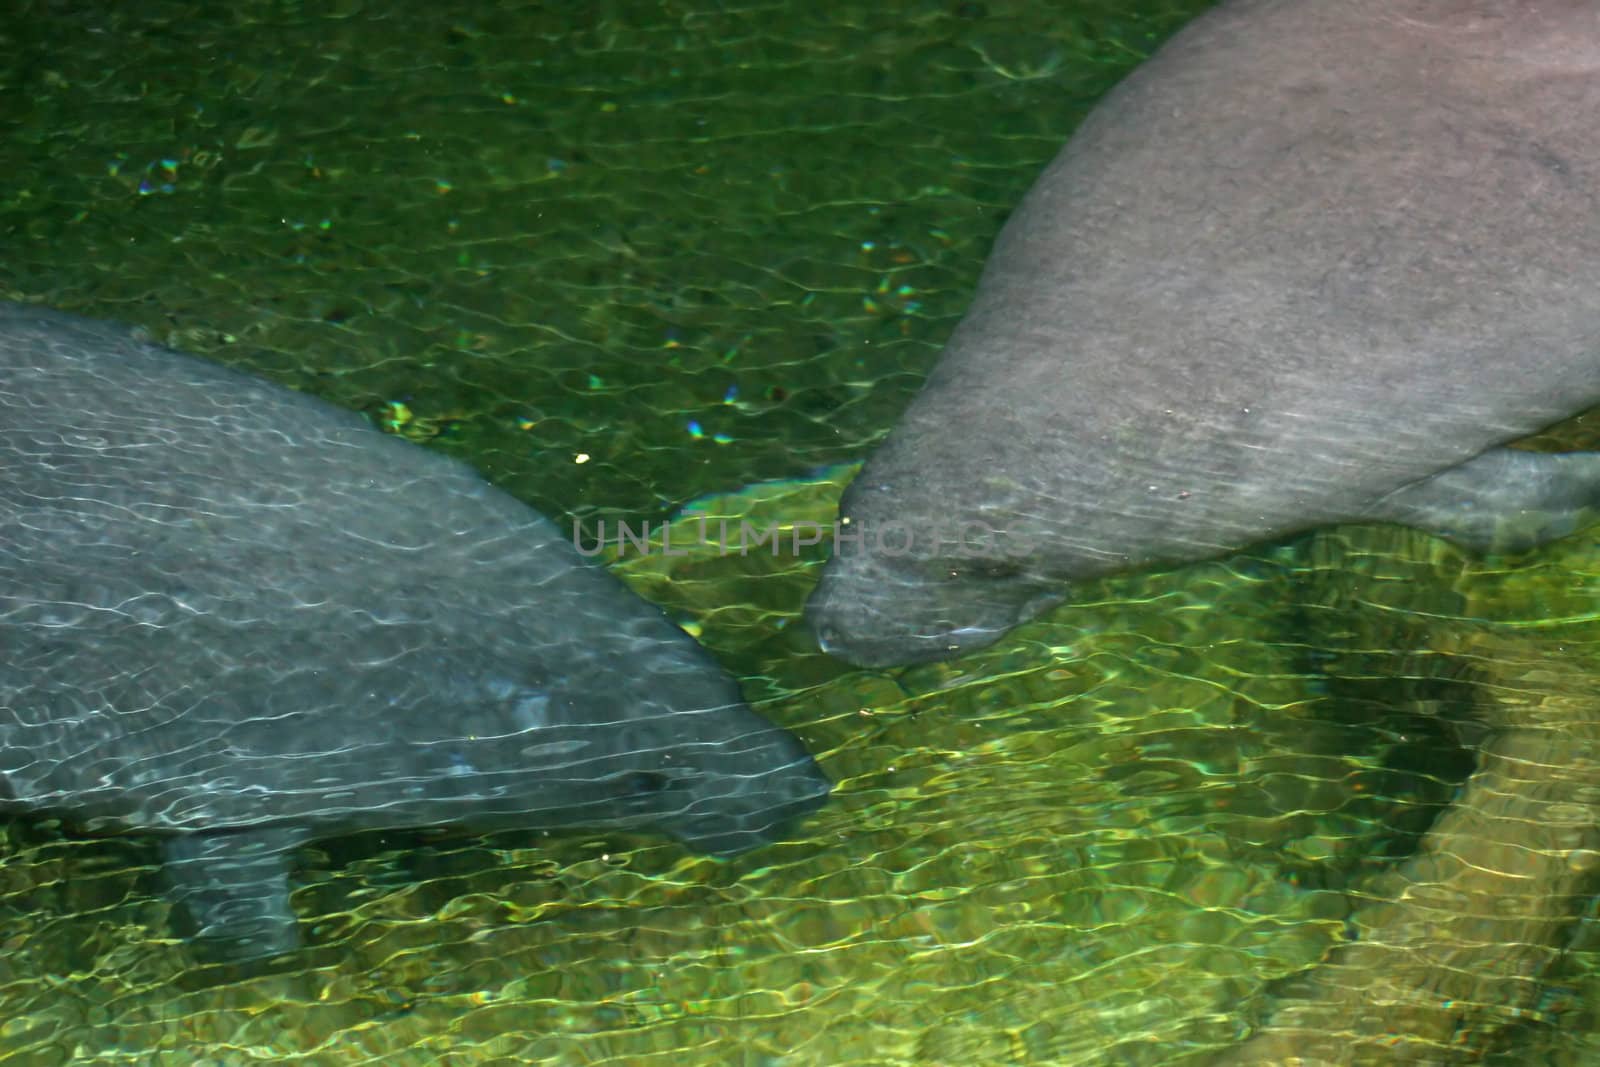 2 manatees swimming in the water together